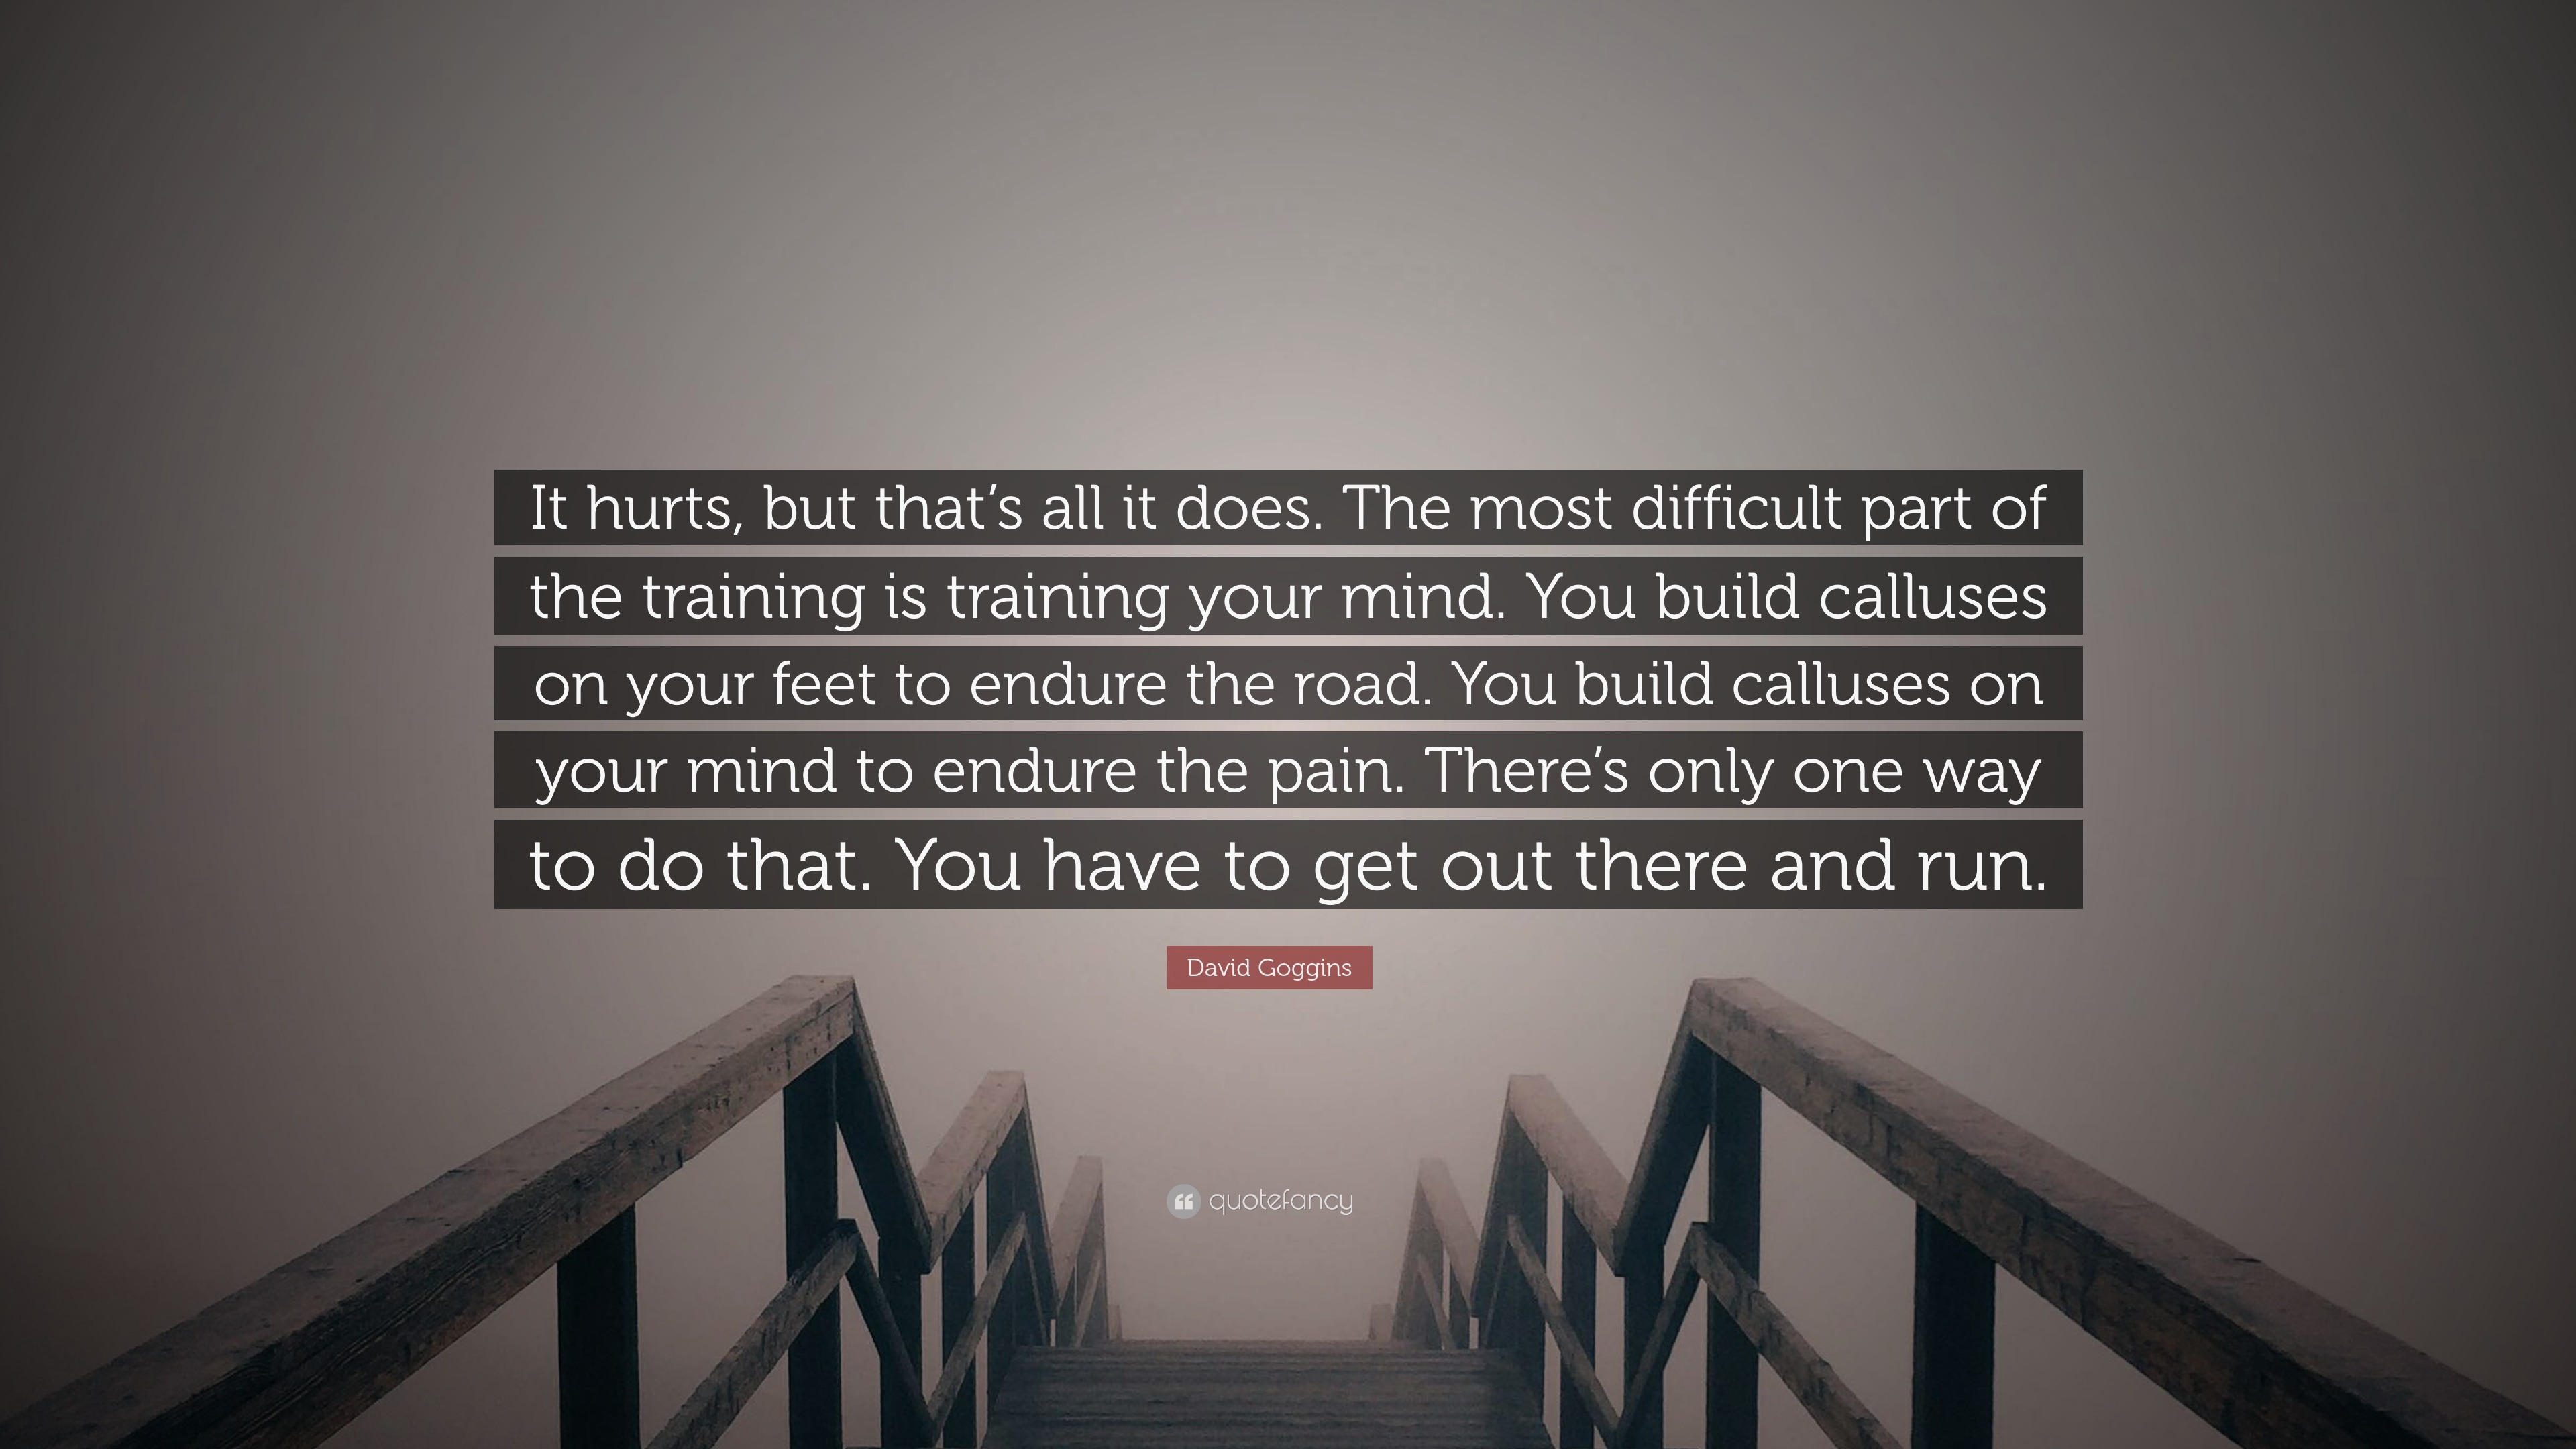 David Goggins Quote: “It hurts, but that's all it does. The most difficult  part of the training is training your mind. You build calluses on y...”